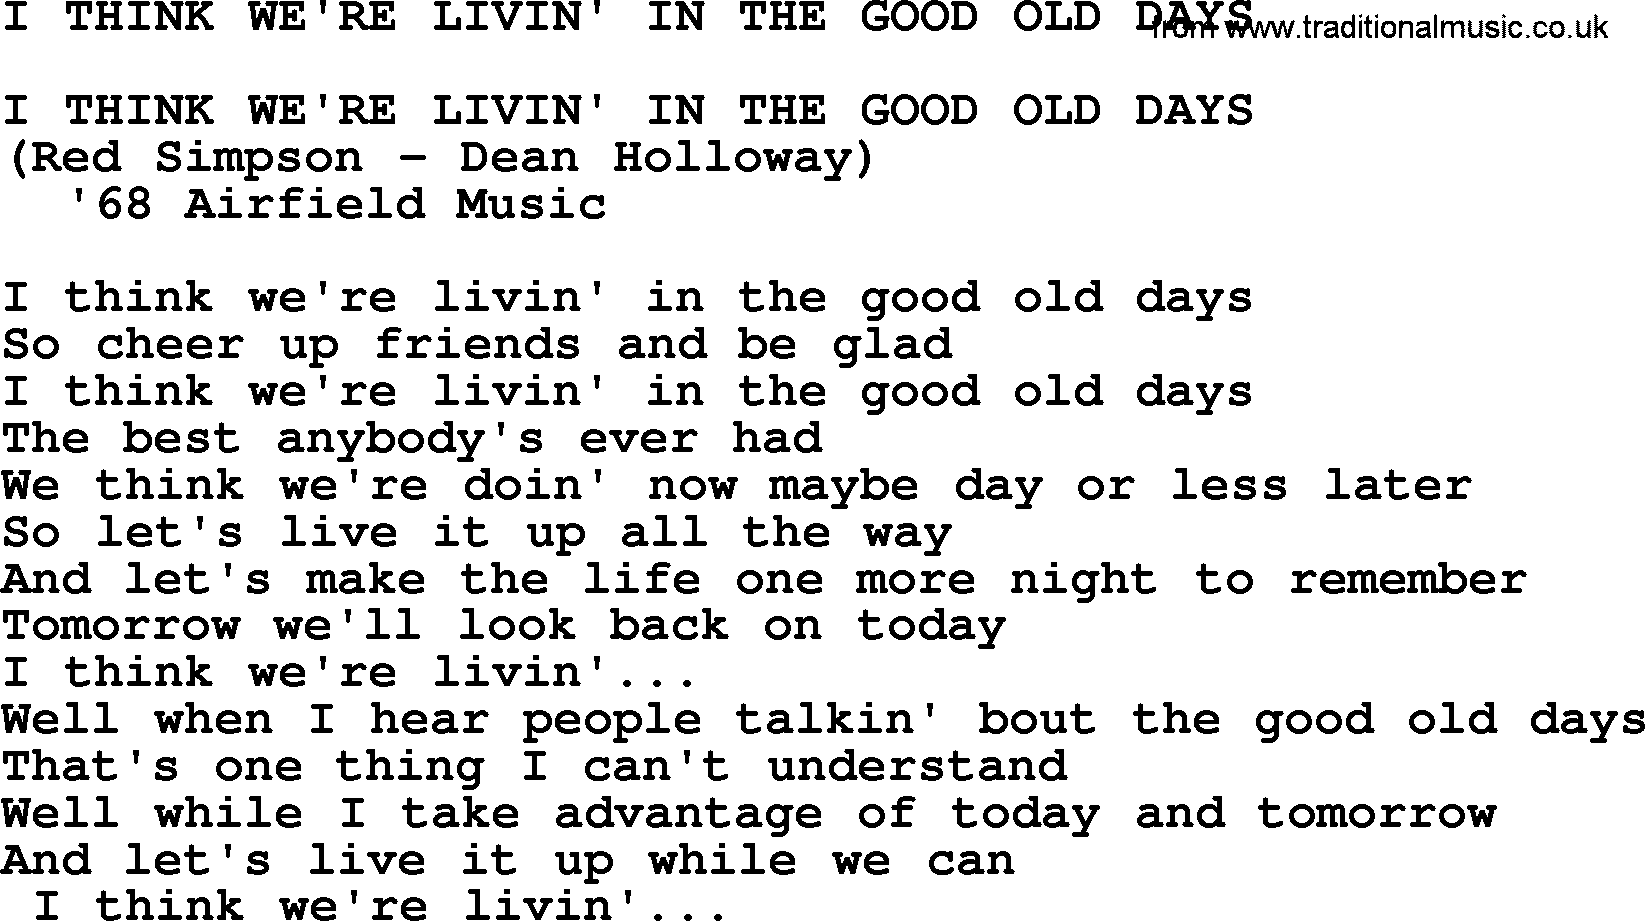 Merle Haggard song: I Think We're Livin' In The Good Old Days, lyrics.